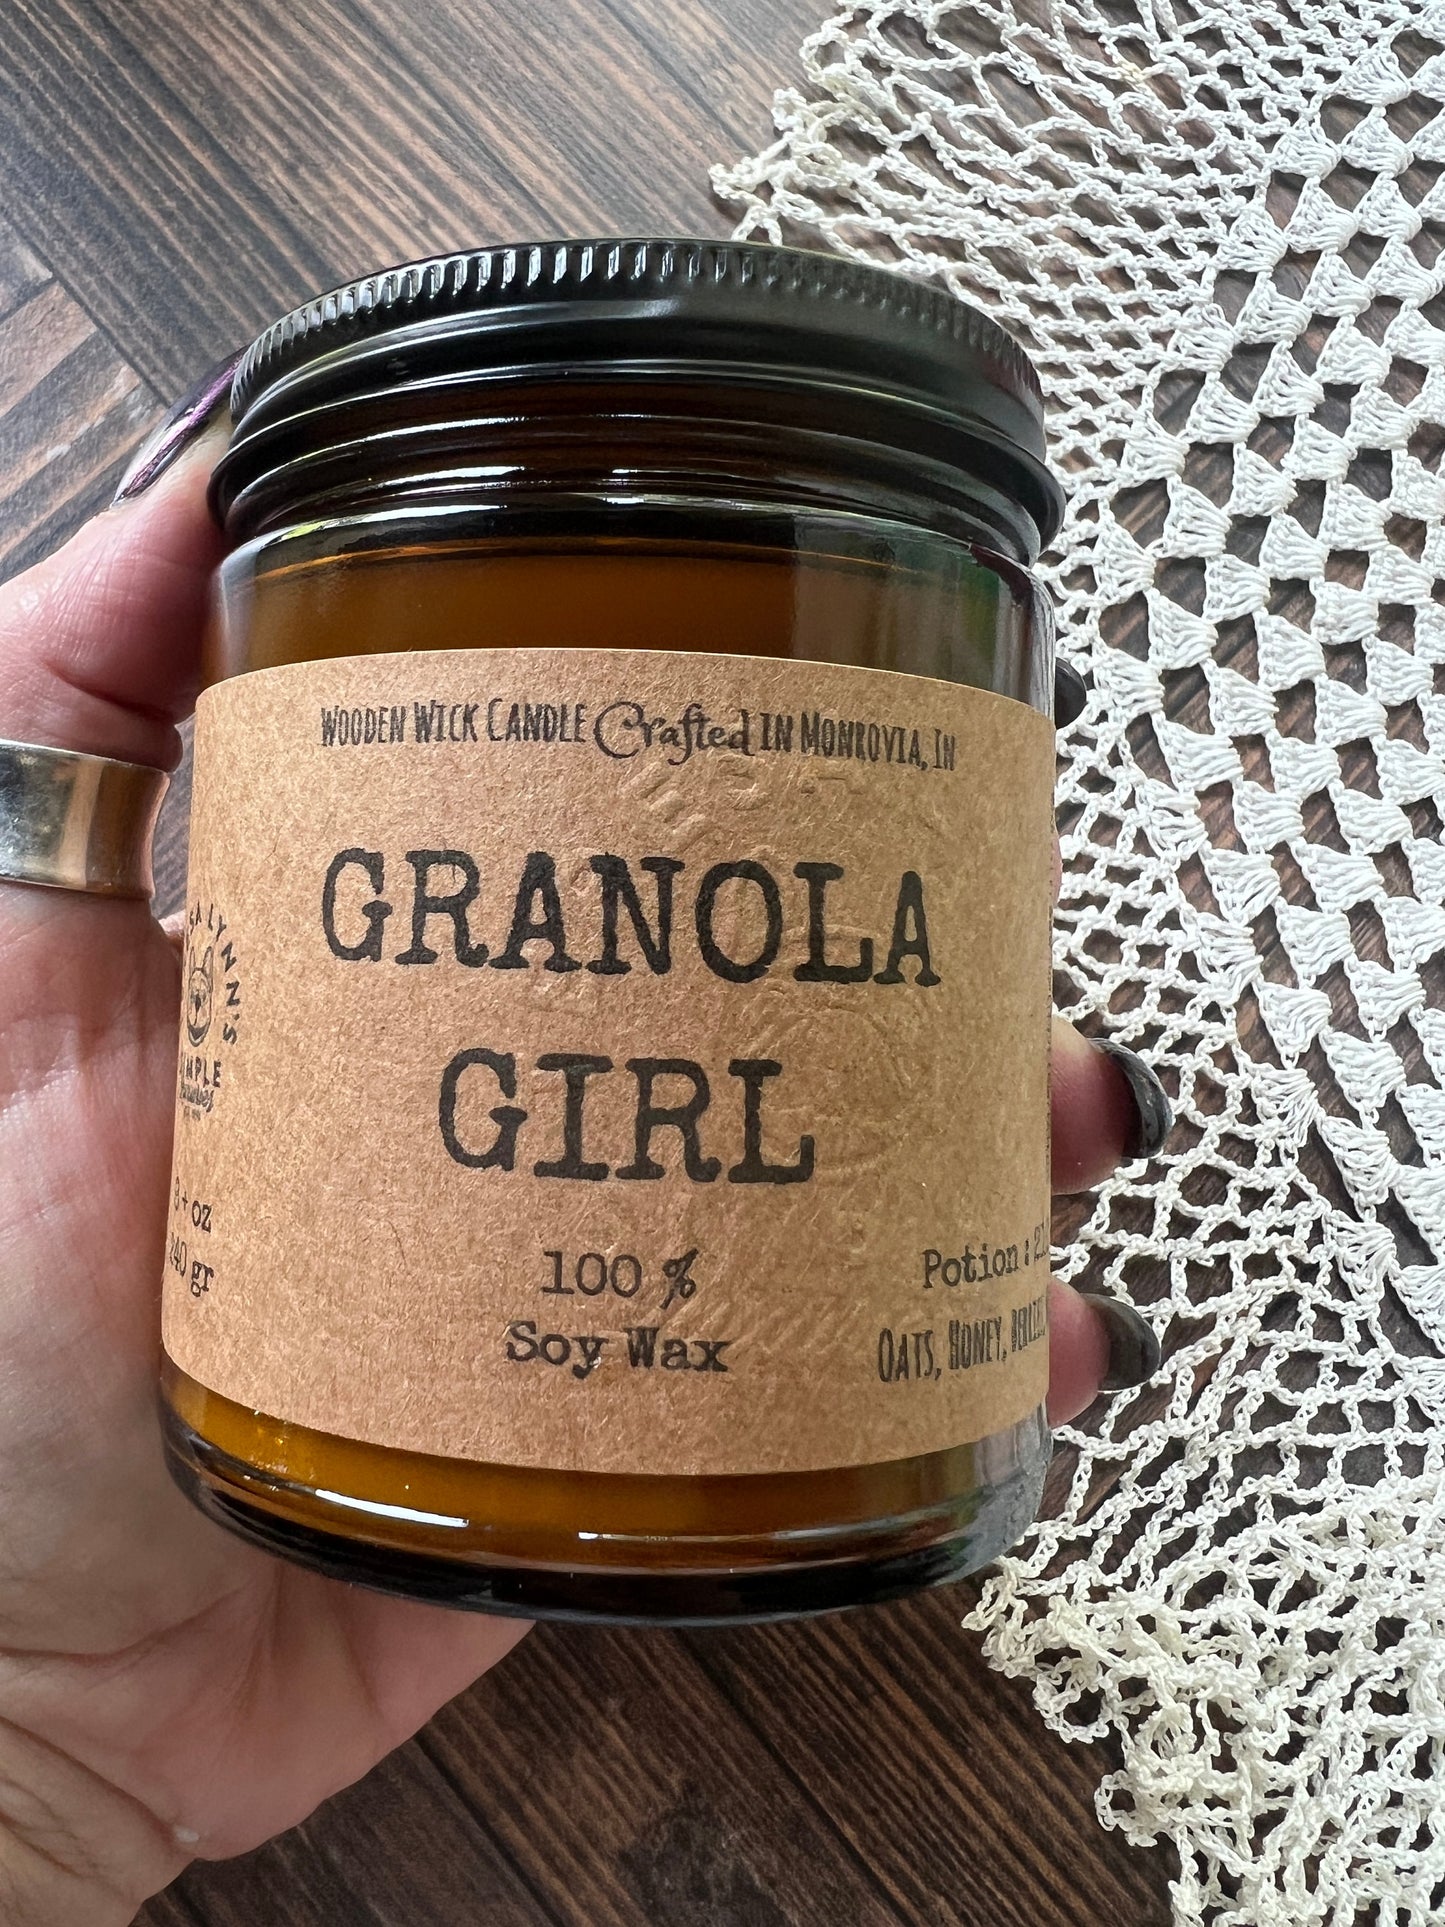 Granola Girl- Oatmeal, Honey, Nut scented wooden wick, soy wax candle